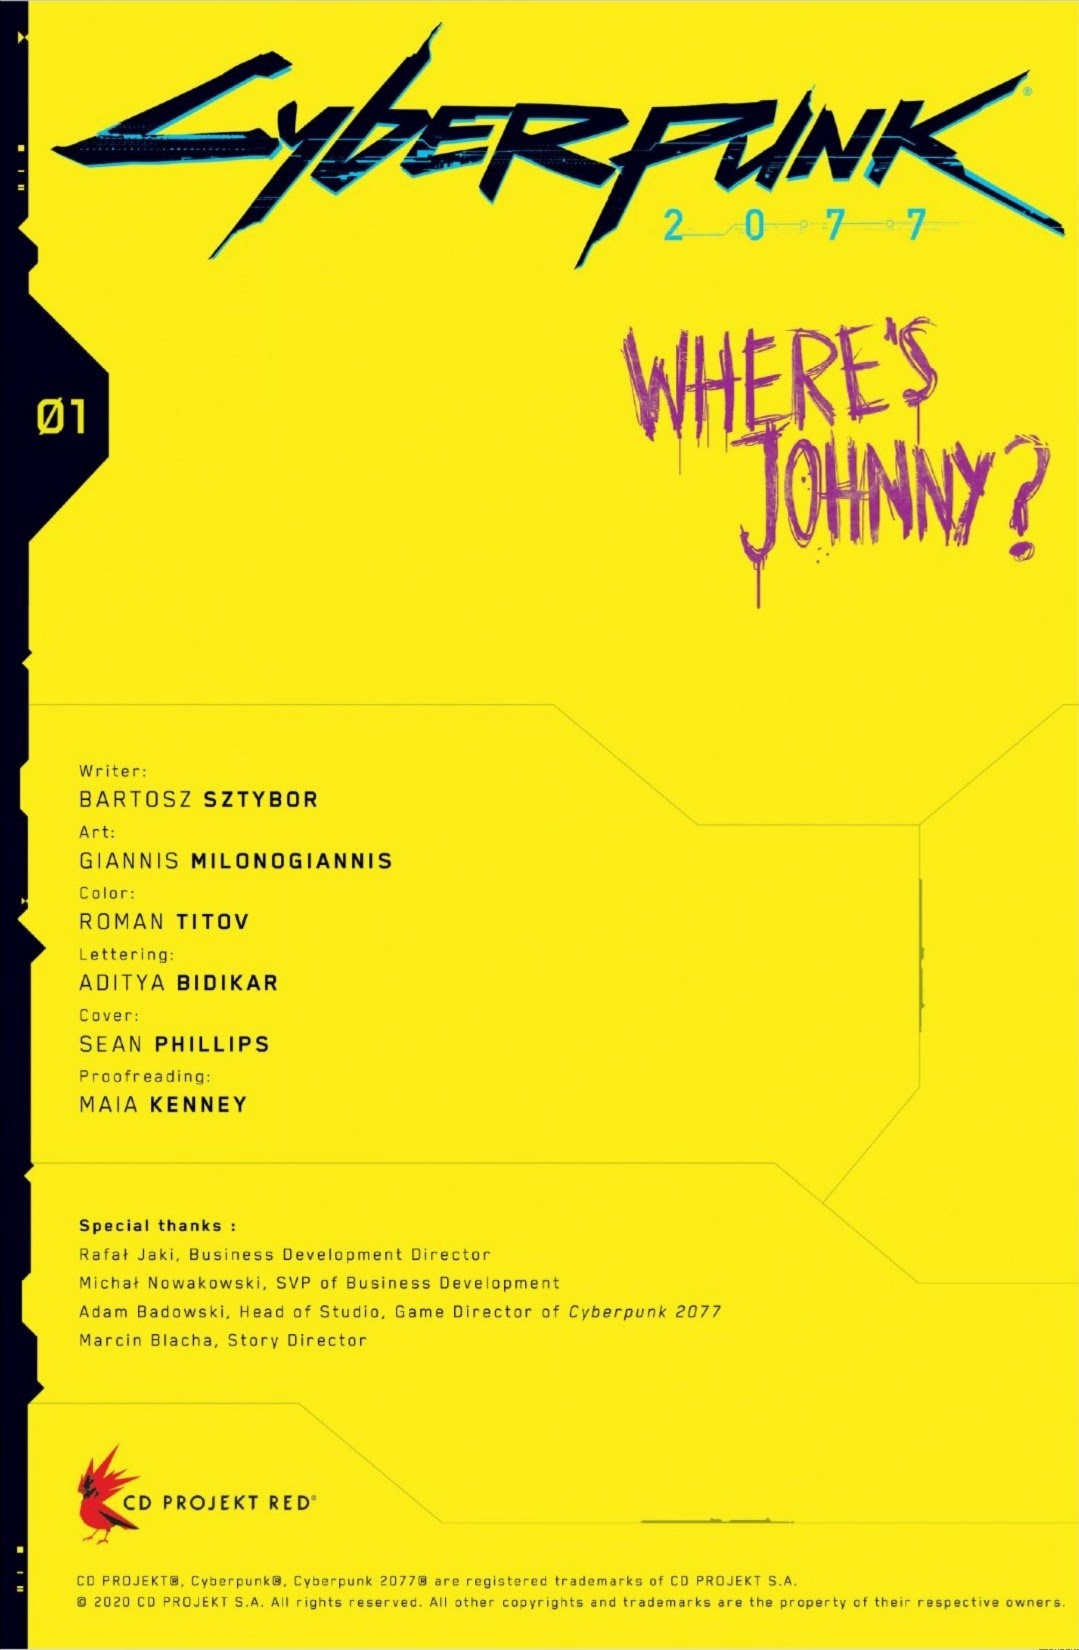 Read online Cyberpunk 2077: Where’s Johnny comic -  Issue #1 - 2